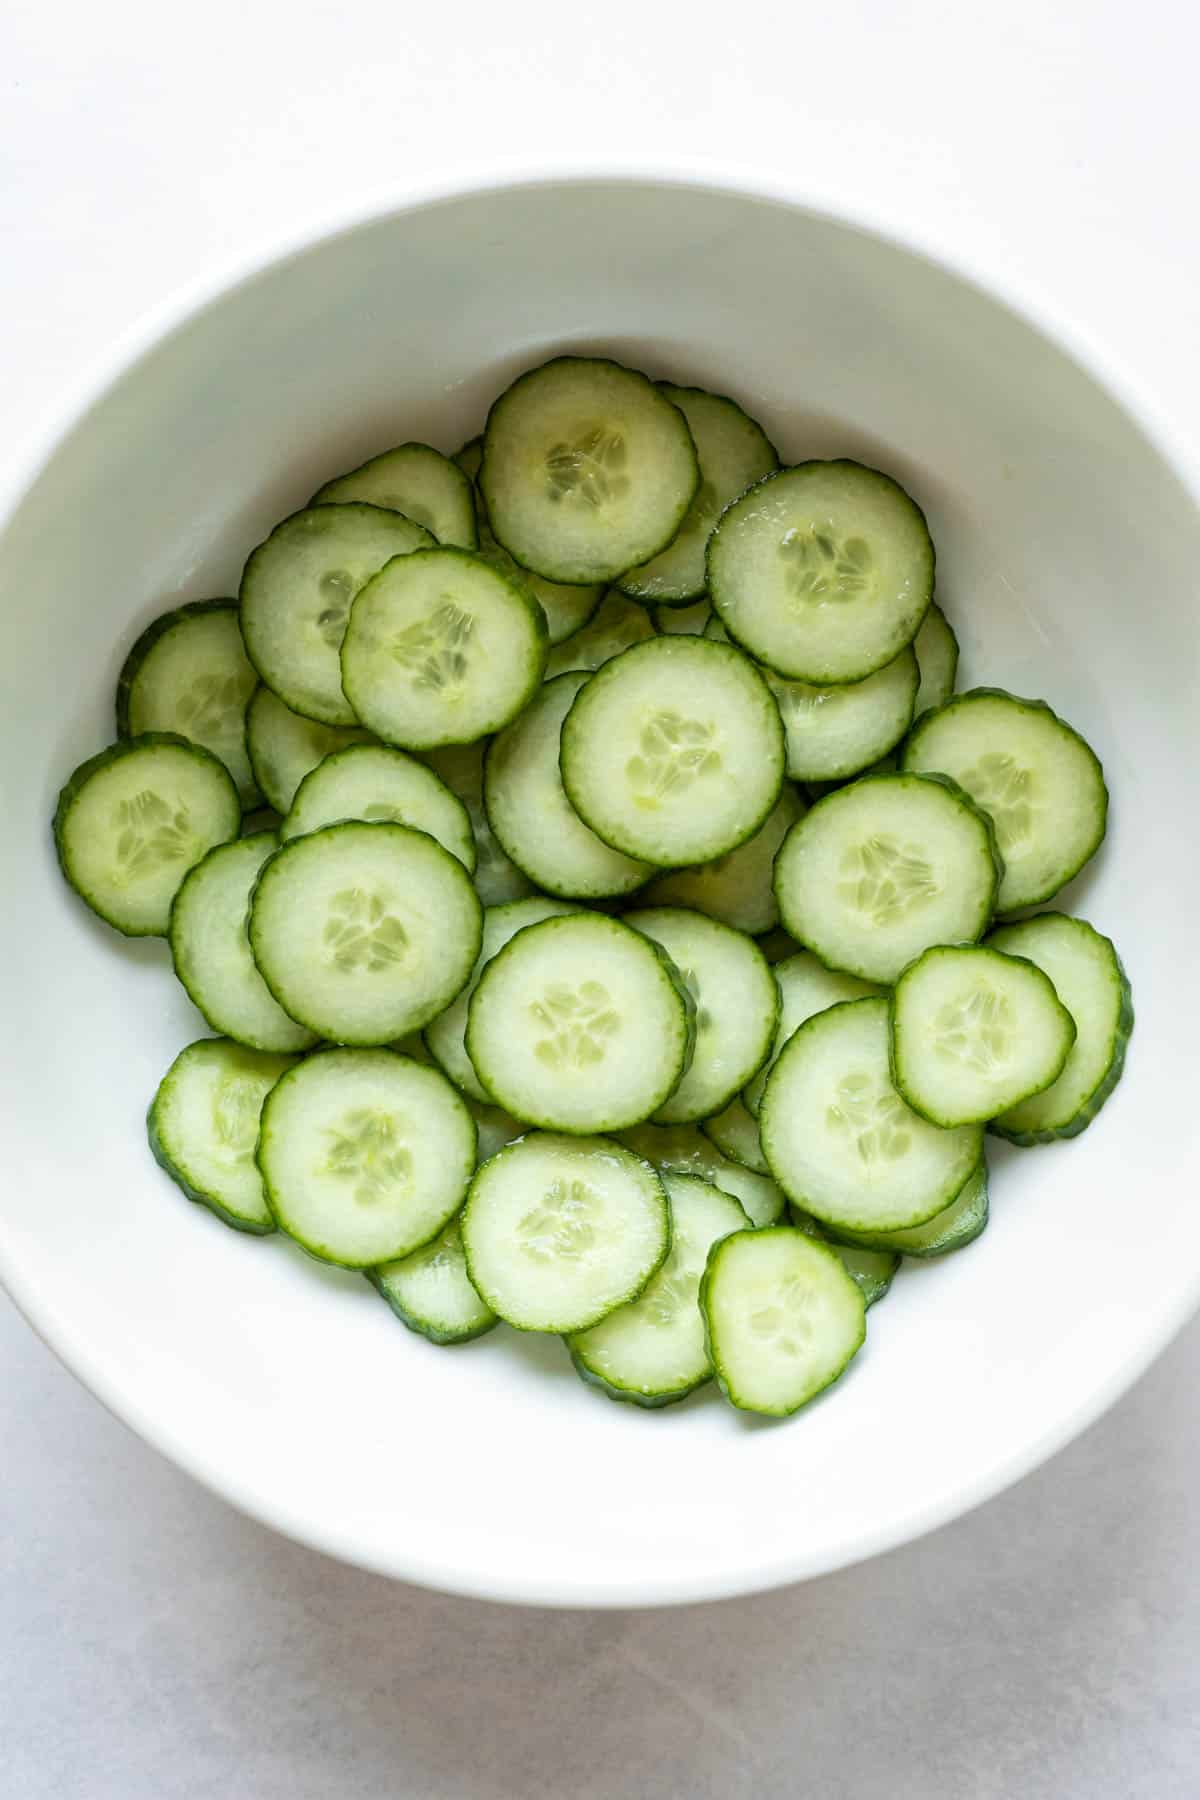 Large bowl filled with sliced English cucumber that has been salted to draw out moisture.